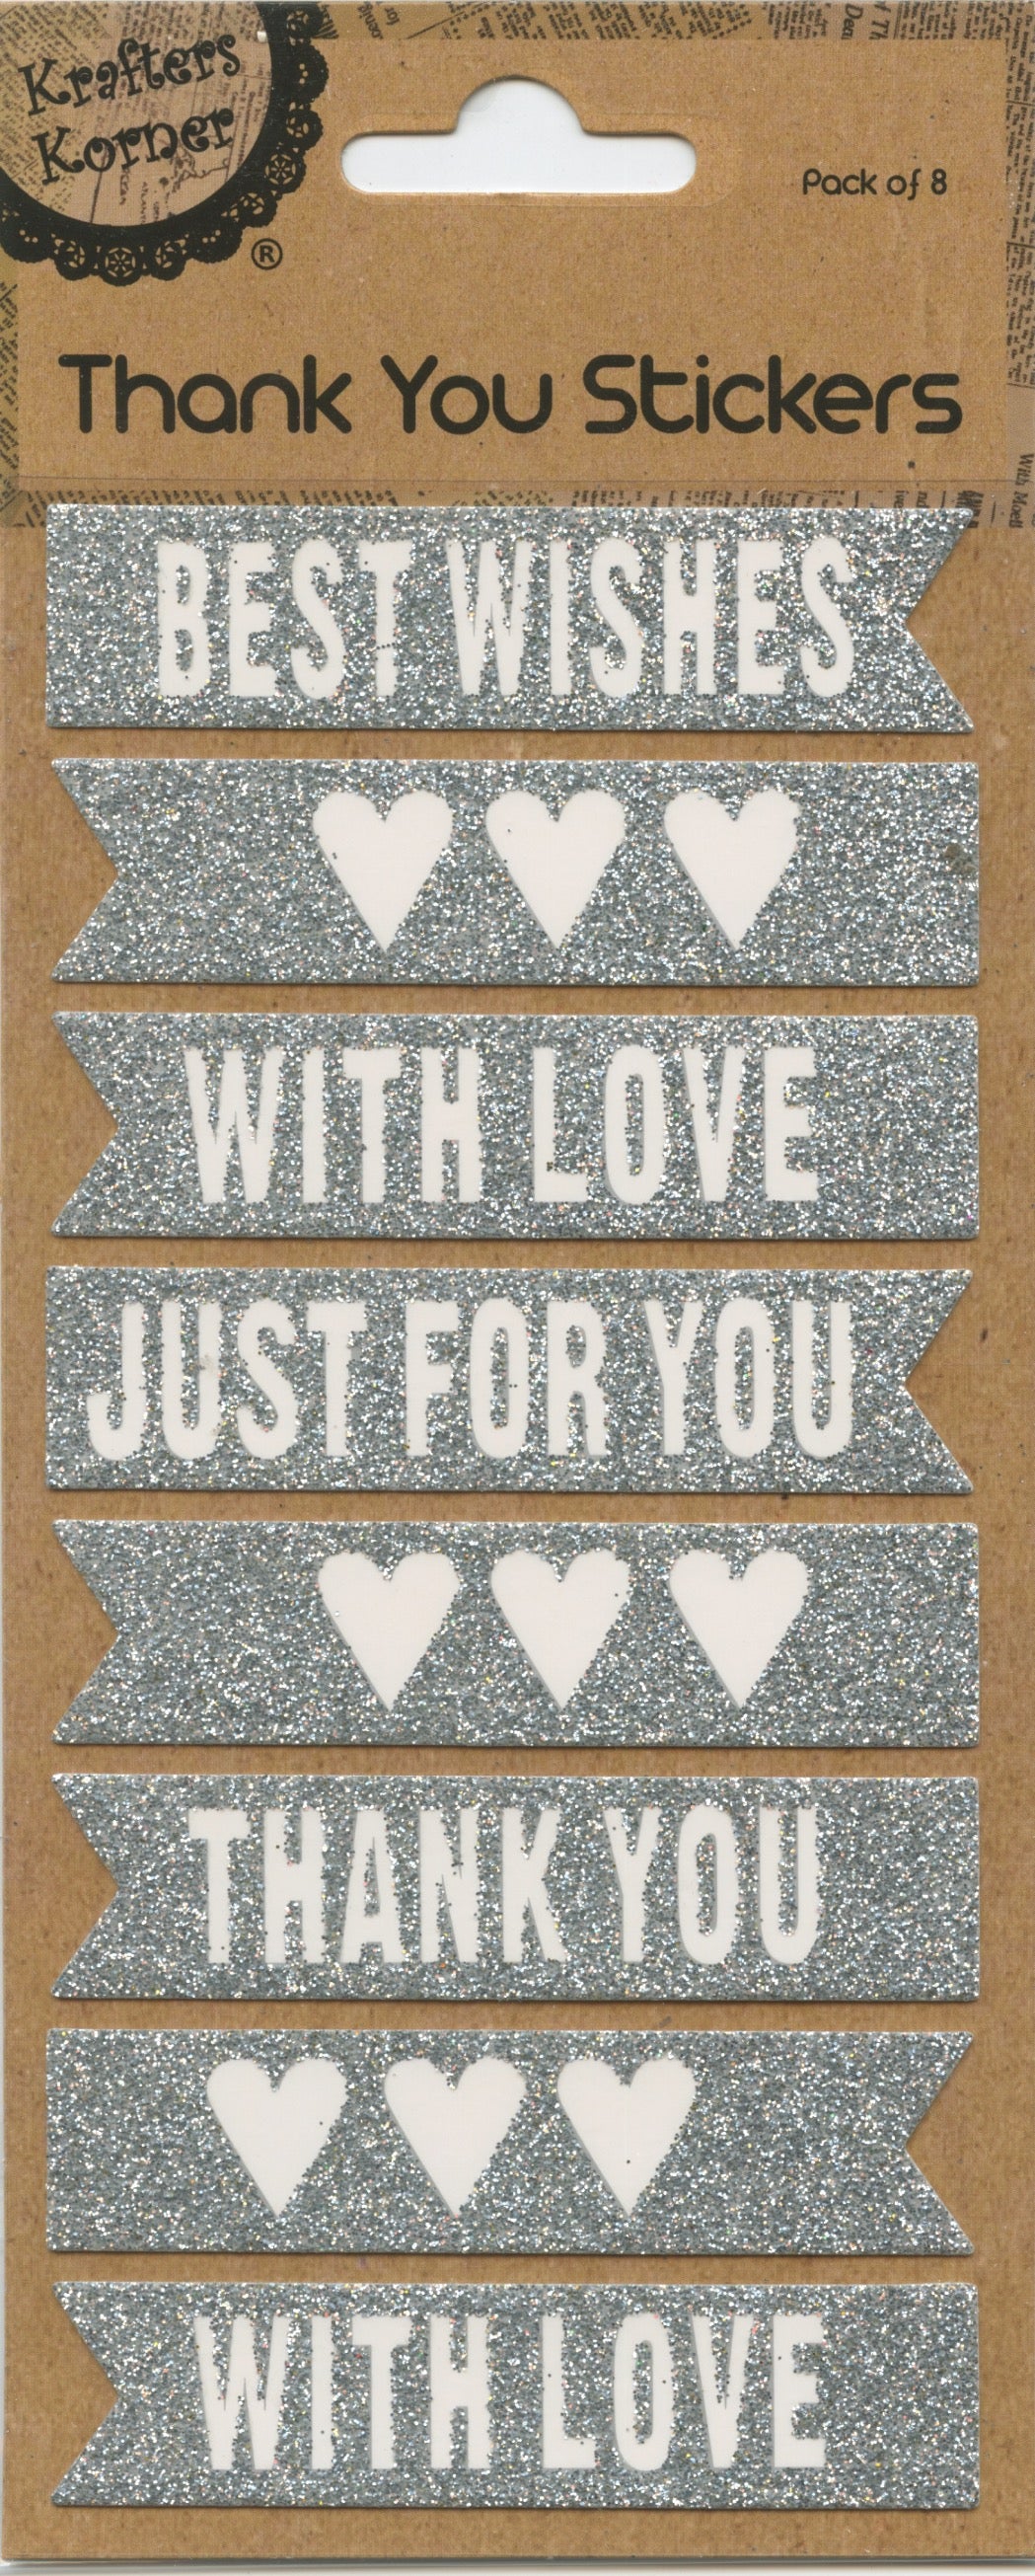 Thank You Stickers - Wording and Hearts - Silver glitter - 8 pack